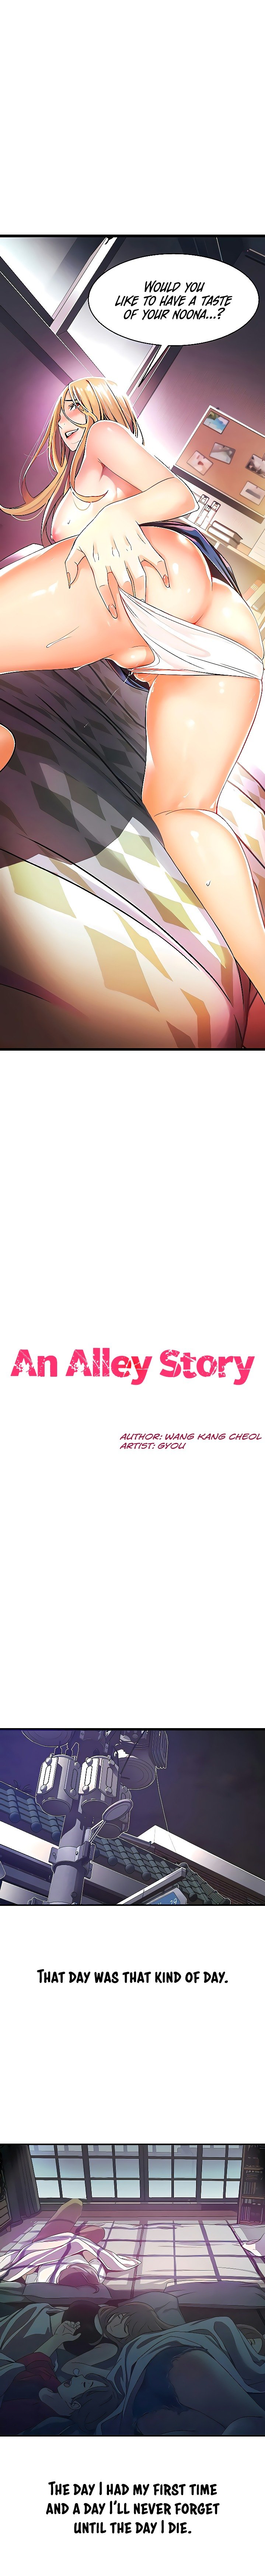 an-alley-story-chap-2-1